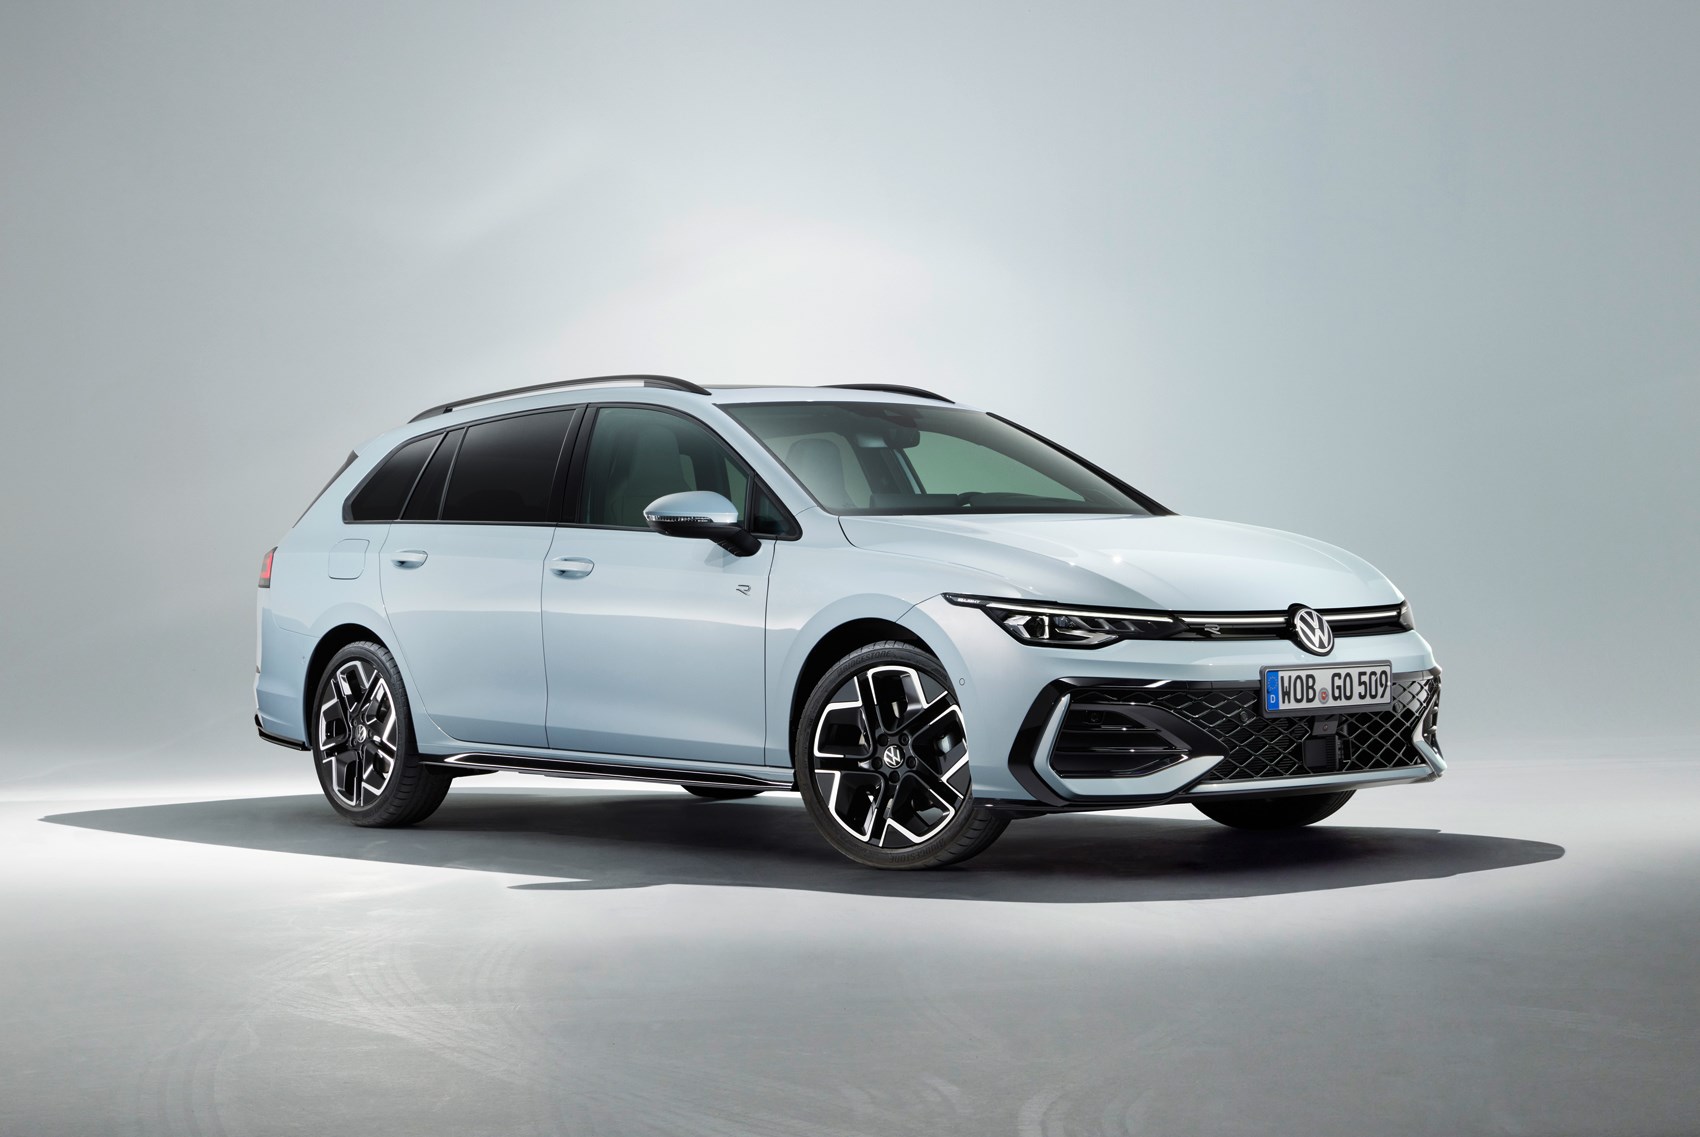 2021 Volkswagen Golf Mark 8 – What We Know about the New Compact